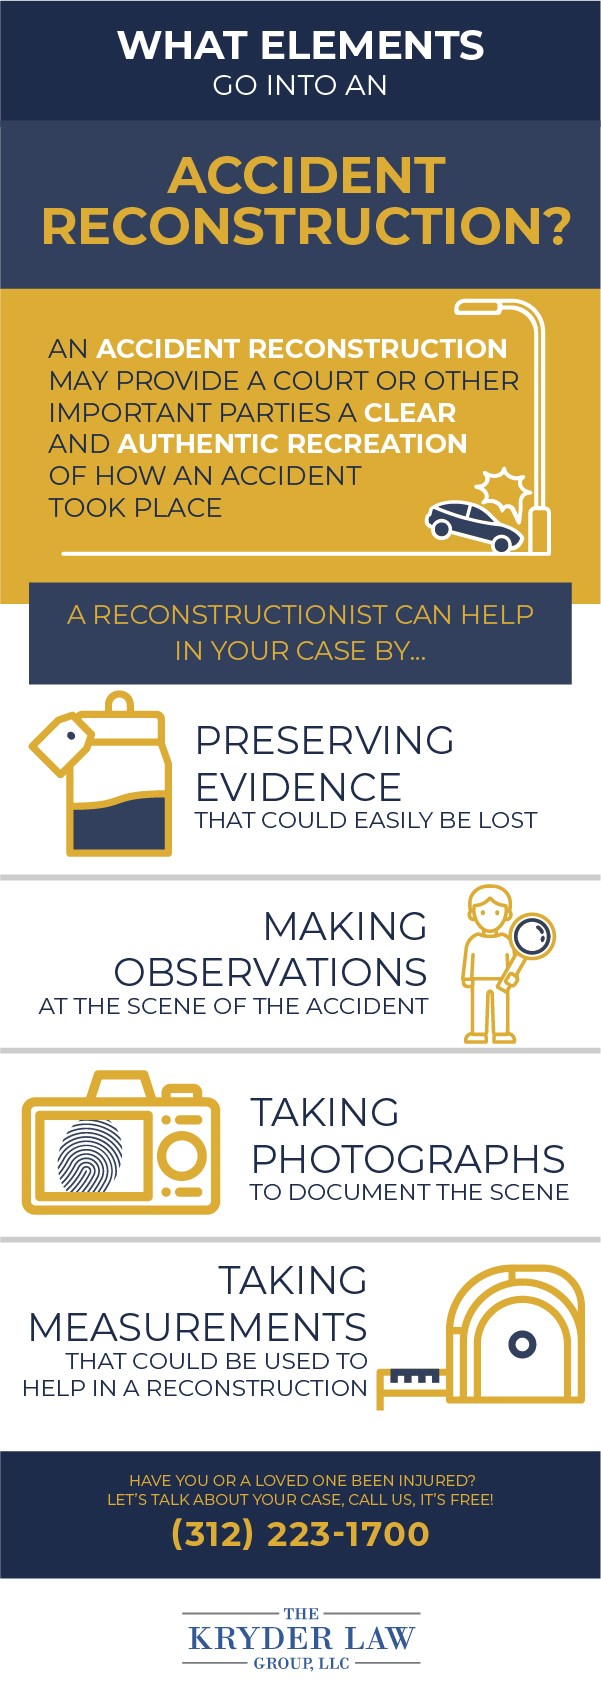 Accident Reconstruction Infographic